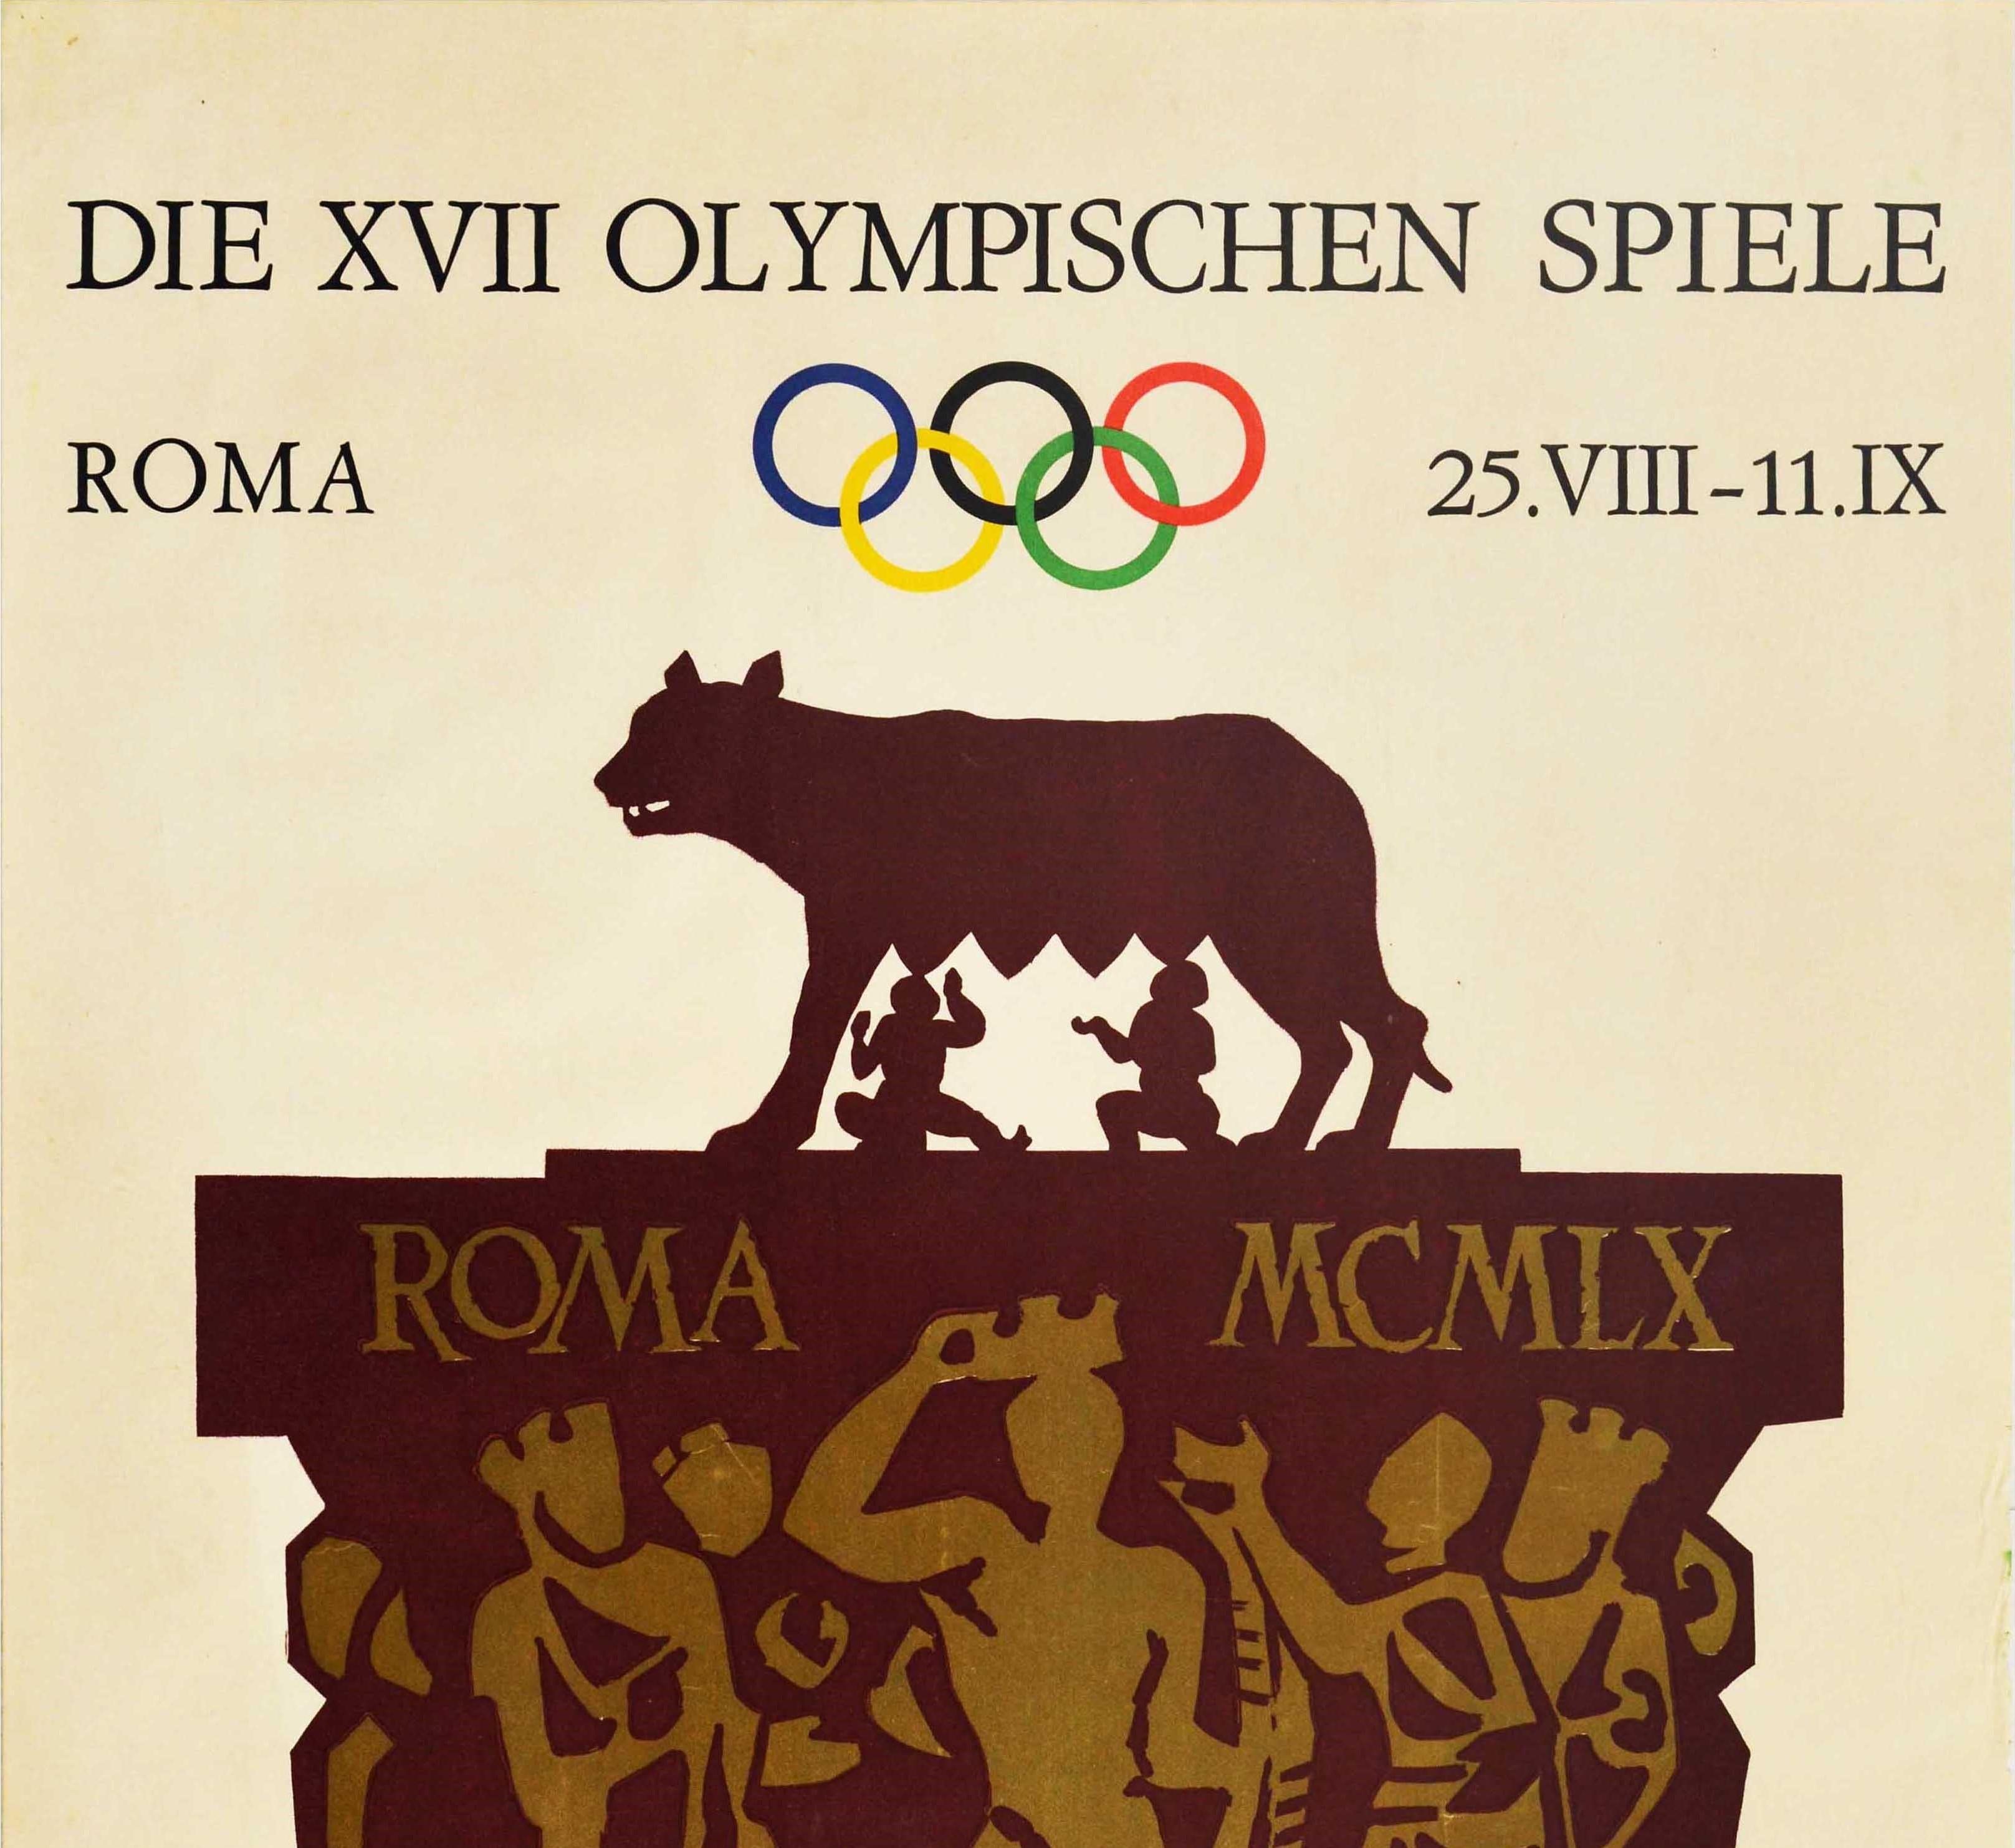 Original Vintage Sport Poster Rome Olympic Games Italy Romulus And Remus Design - Print by Armando Testa